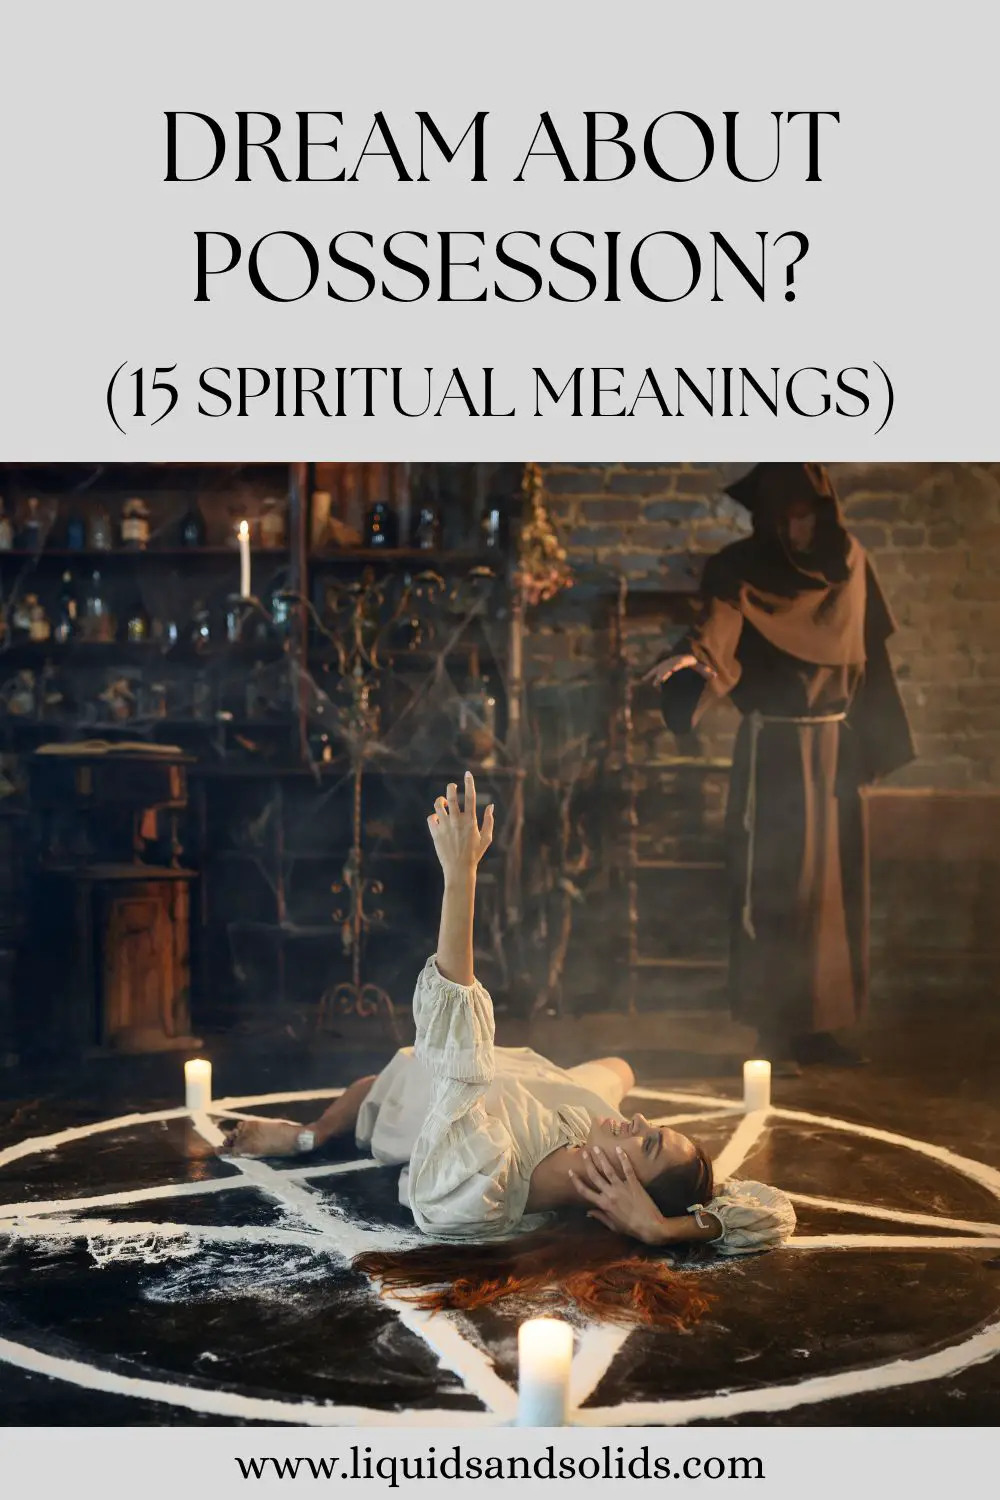 What Is Possession?